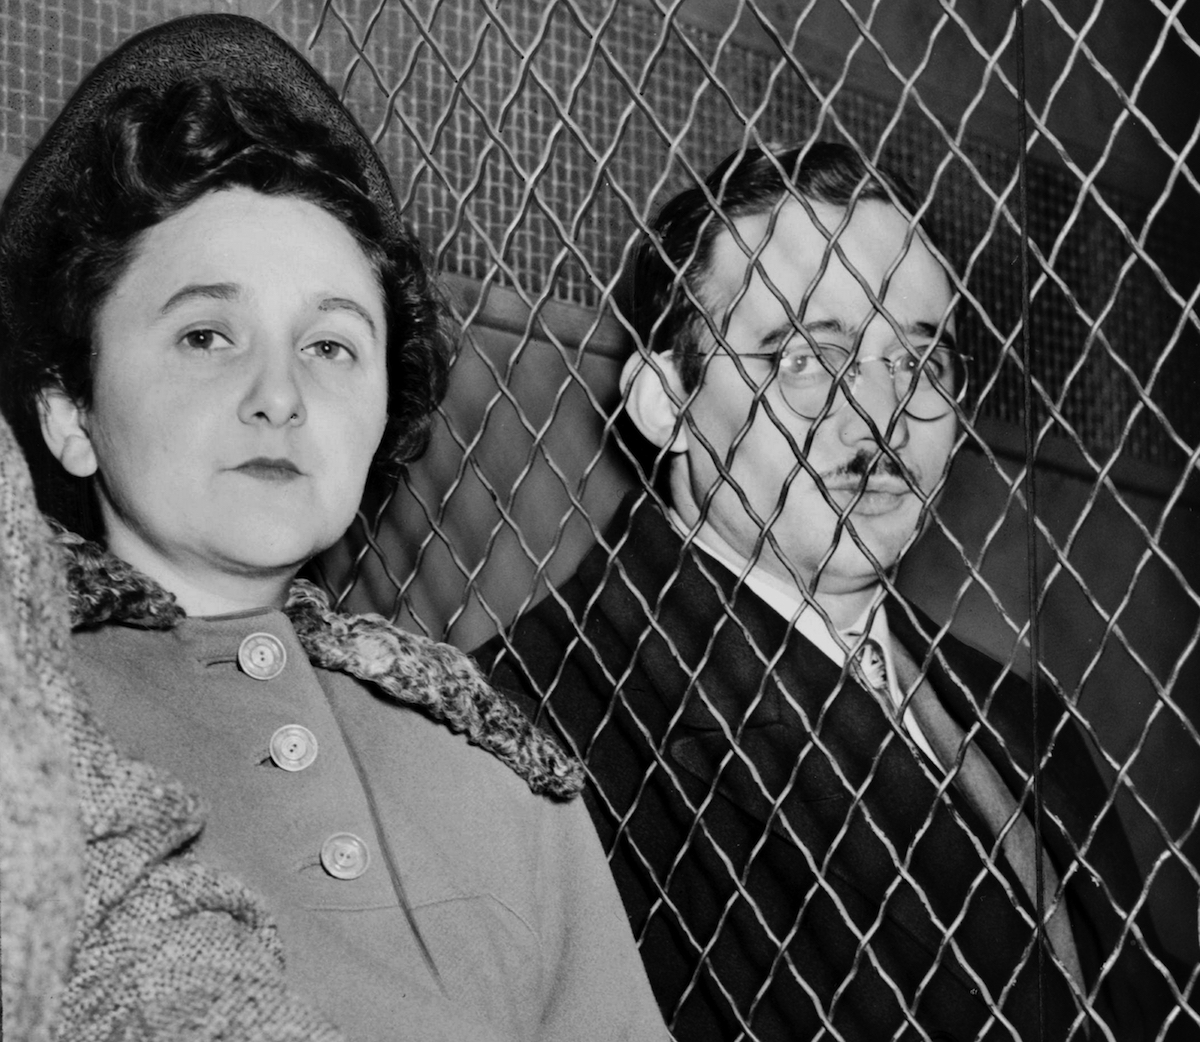 Julius Rosenberg (May 12, 1918 - June 19, 1953) and Ethel Rosenberg (September 28, 1915 - June 19, 1953) American communists, executed after having been found guilty of conspiracy to commit espionage. The charges were in relation to the passing of informa